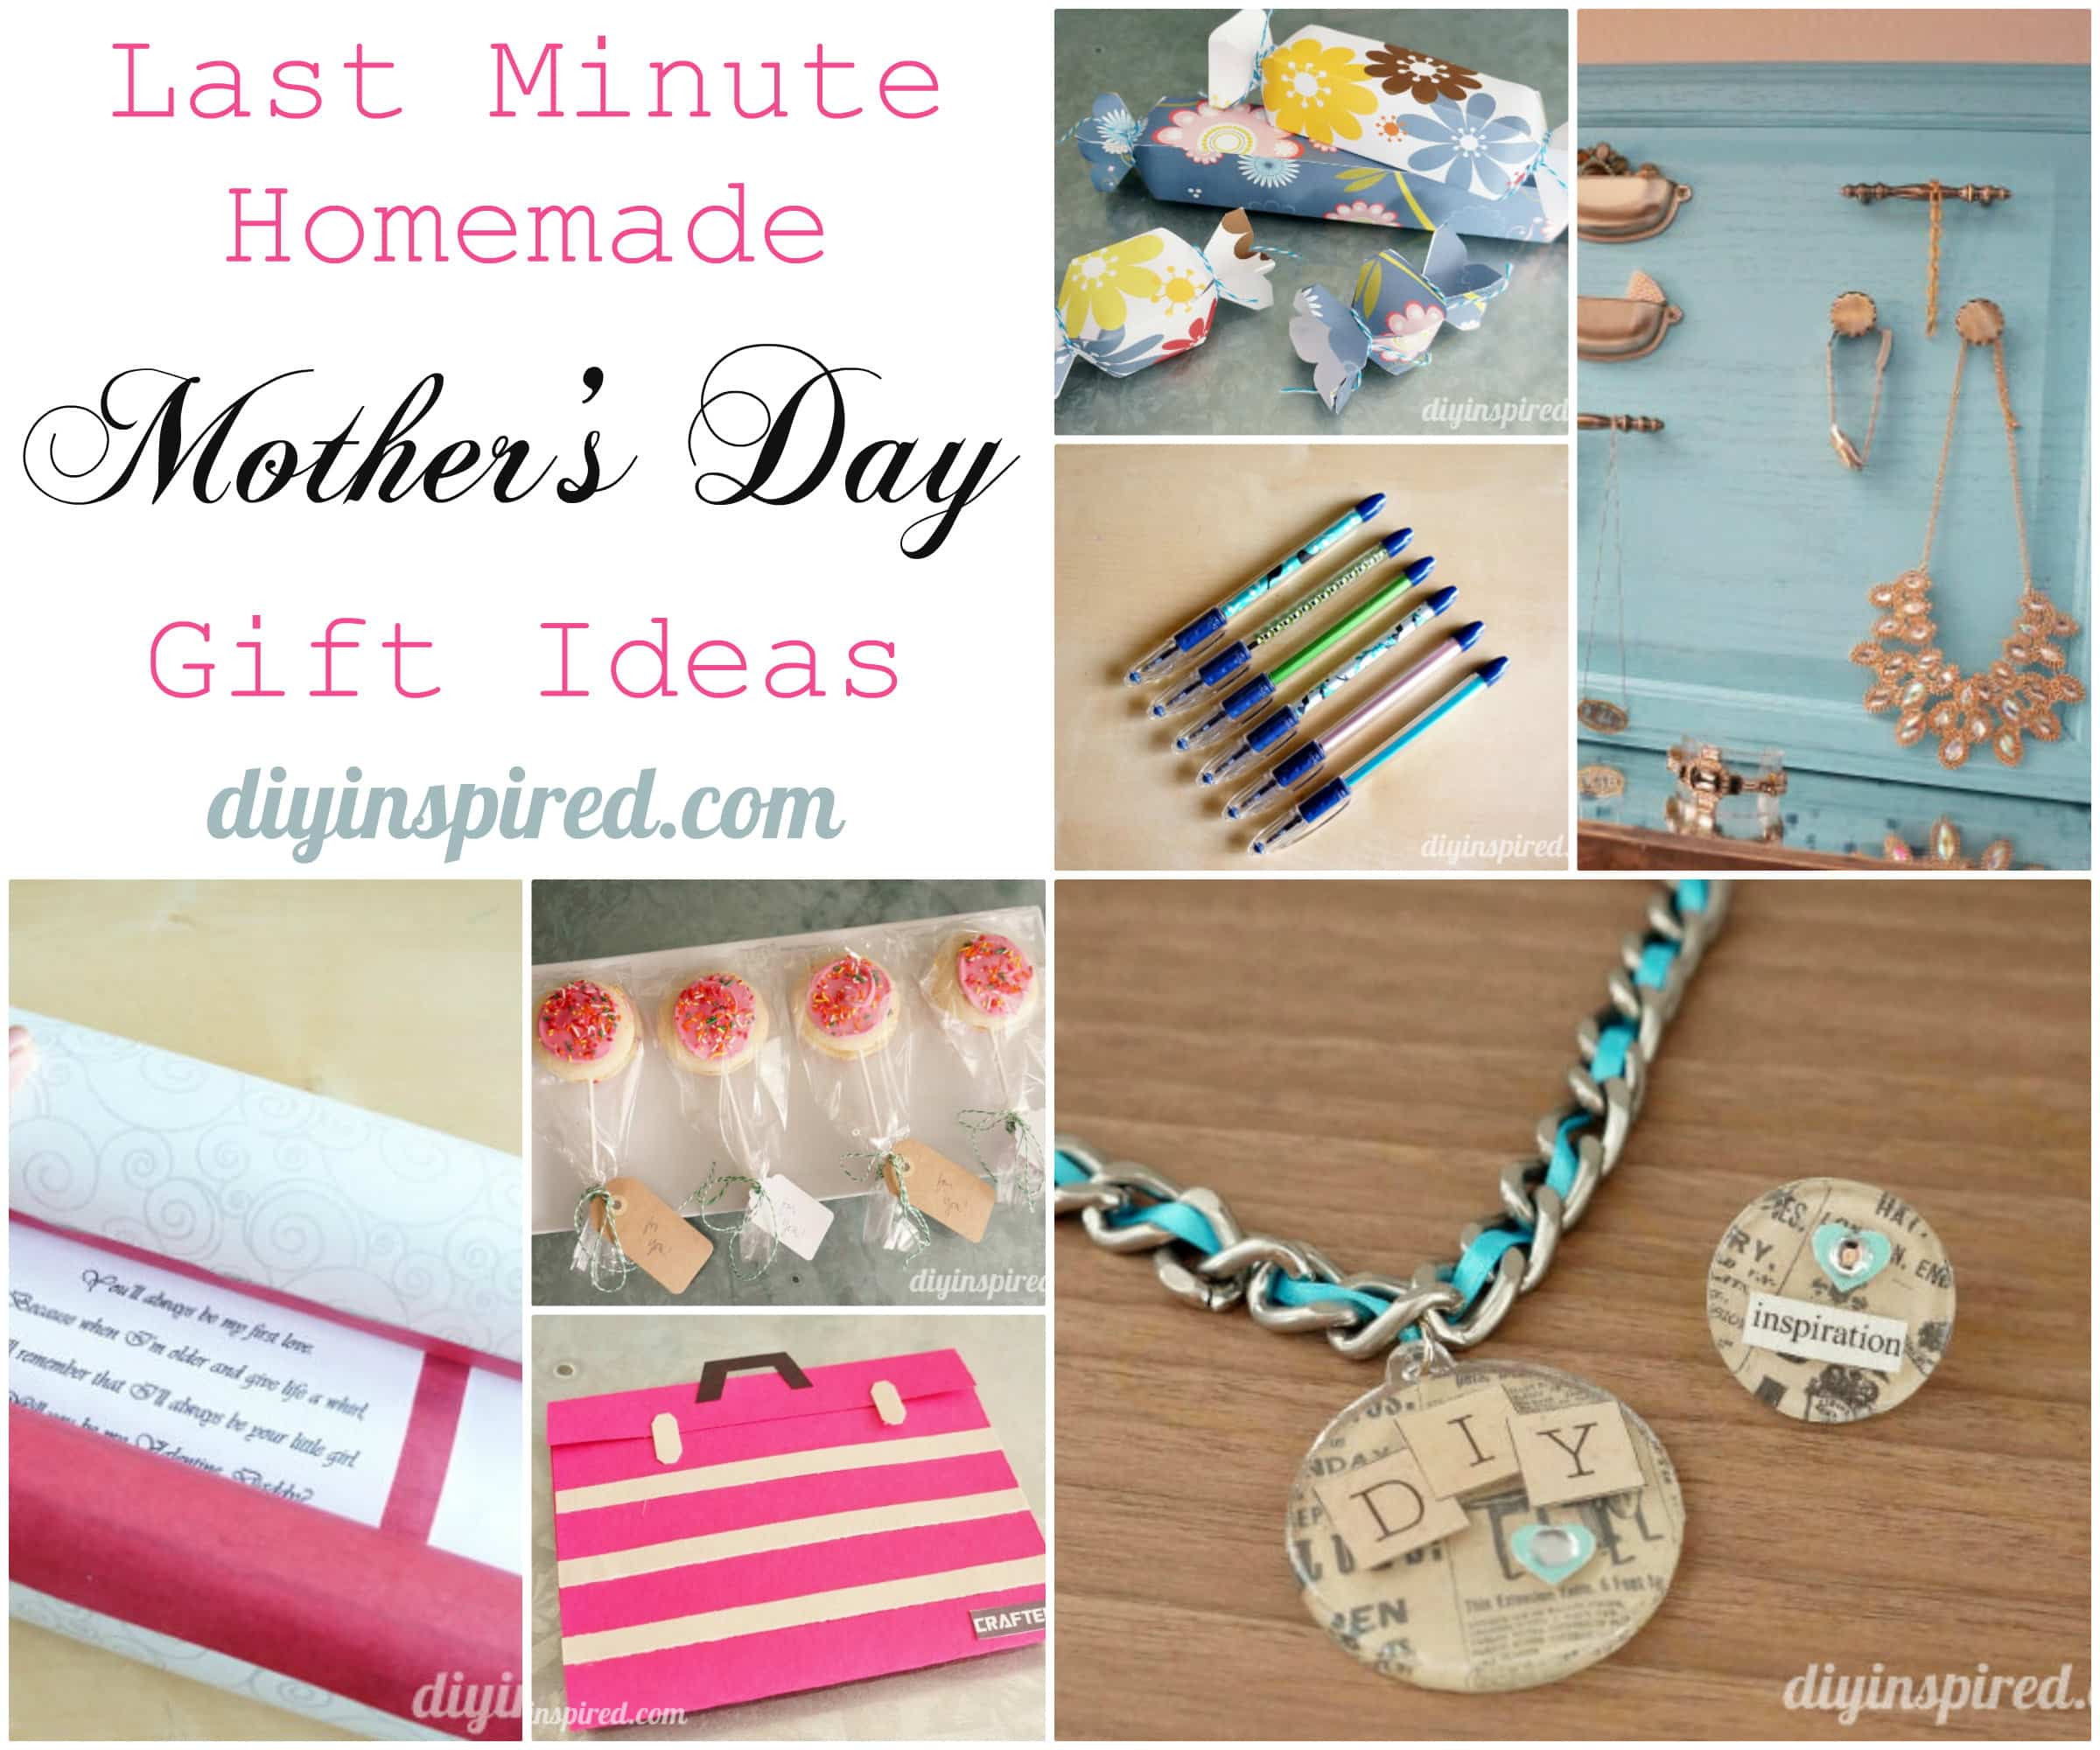 Mothers Day Homemade Gift Ideas
 Last Minute Homemade Mother’s Day Gift Ideas DIY Inspired